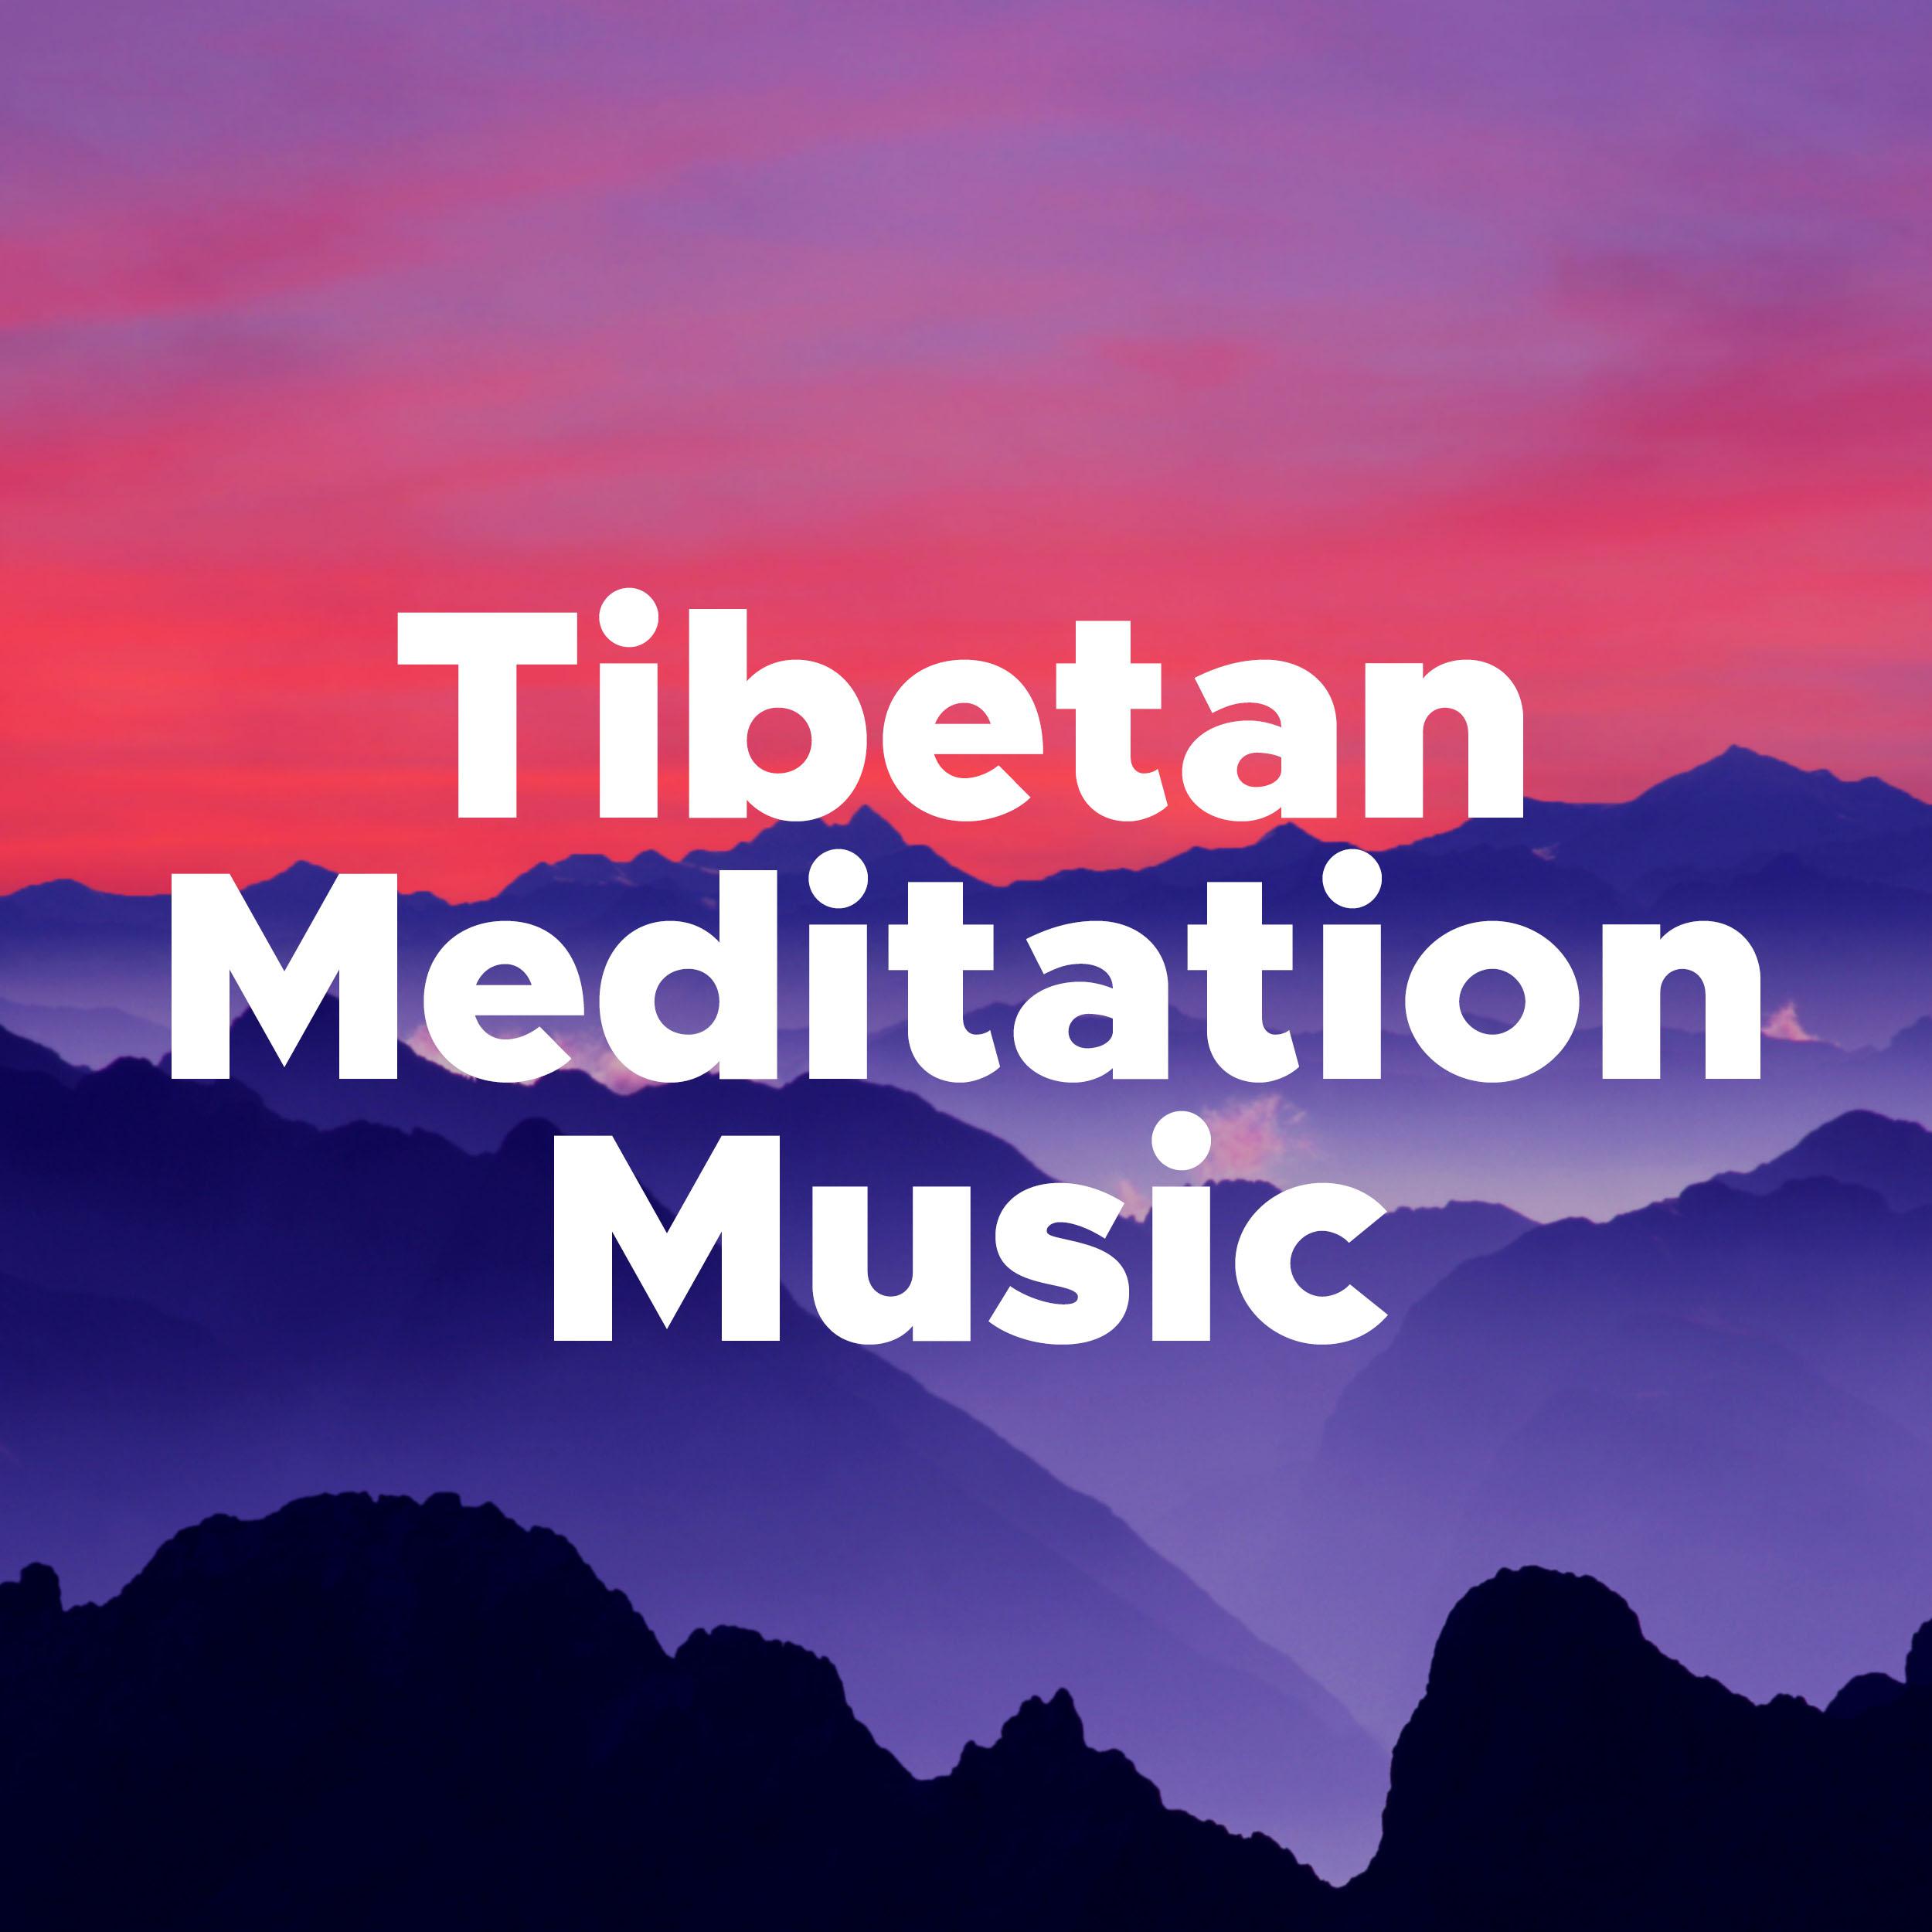 Tibetan Meditation Music - Inner Peace for Meditation, Visualization and Mantra with Singing Bowls and Native Flutes